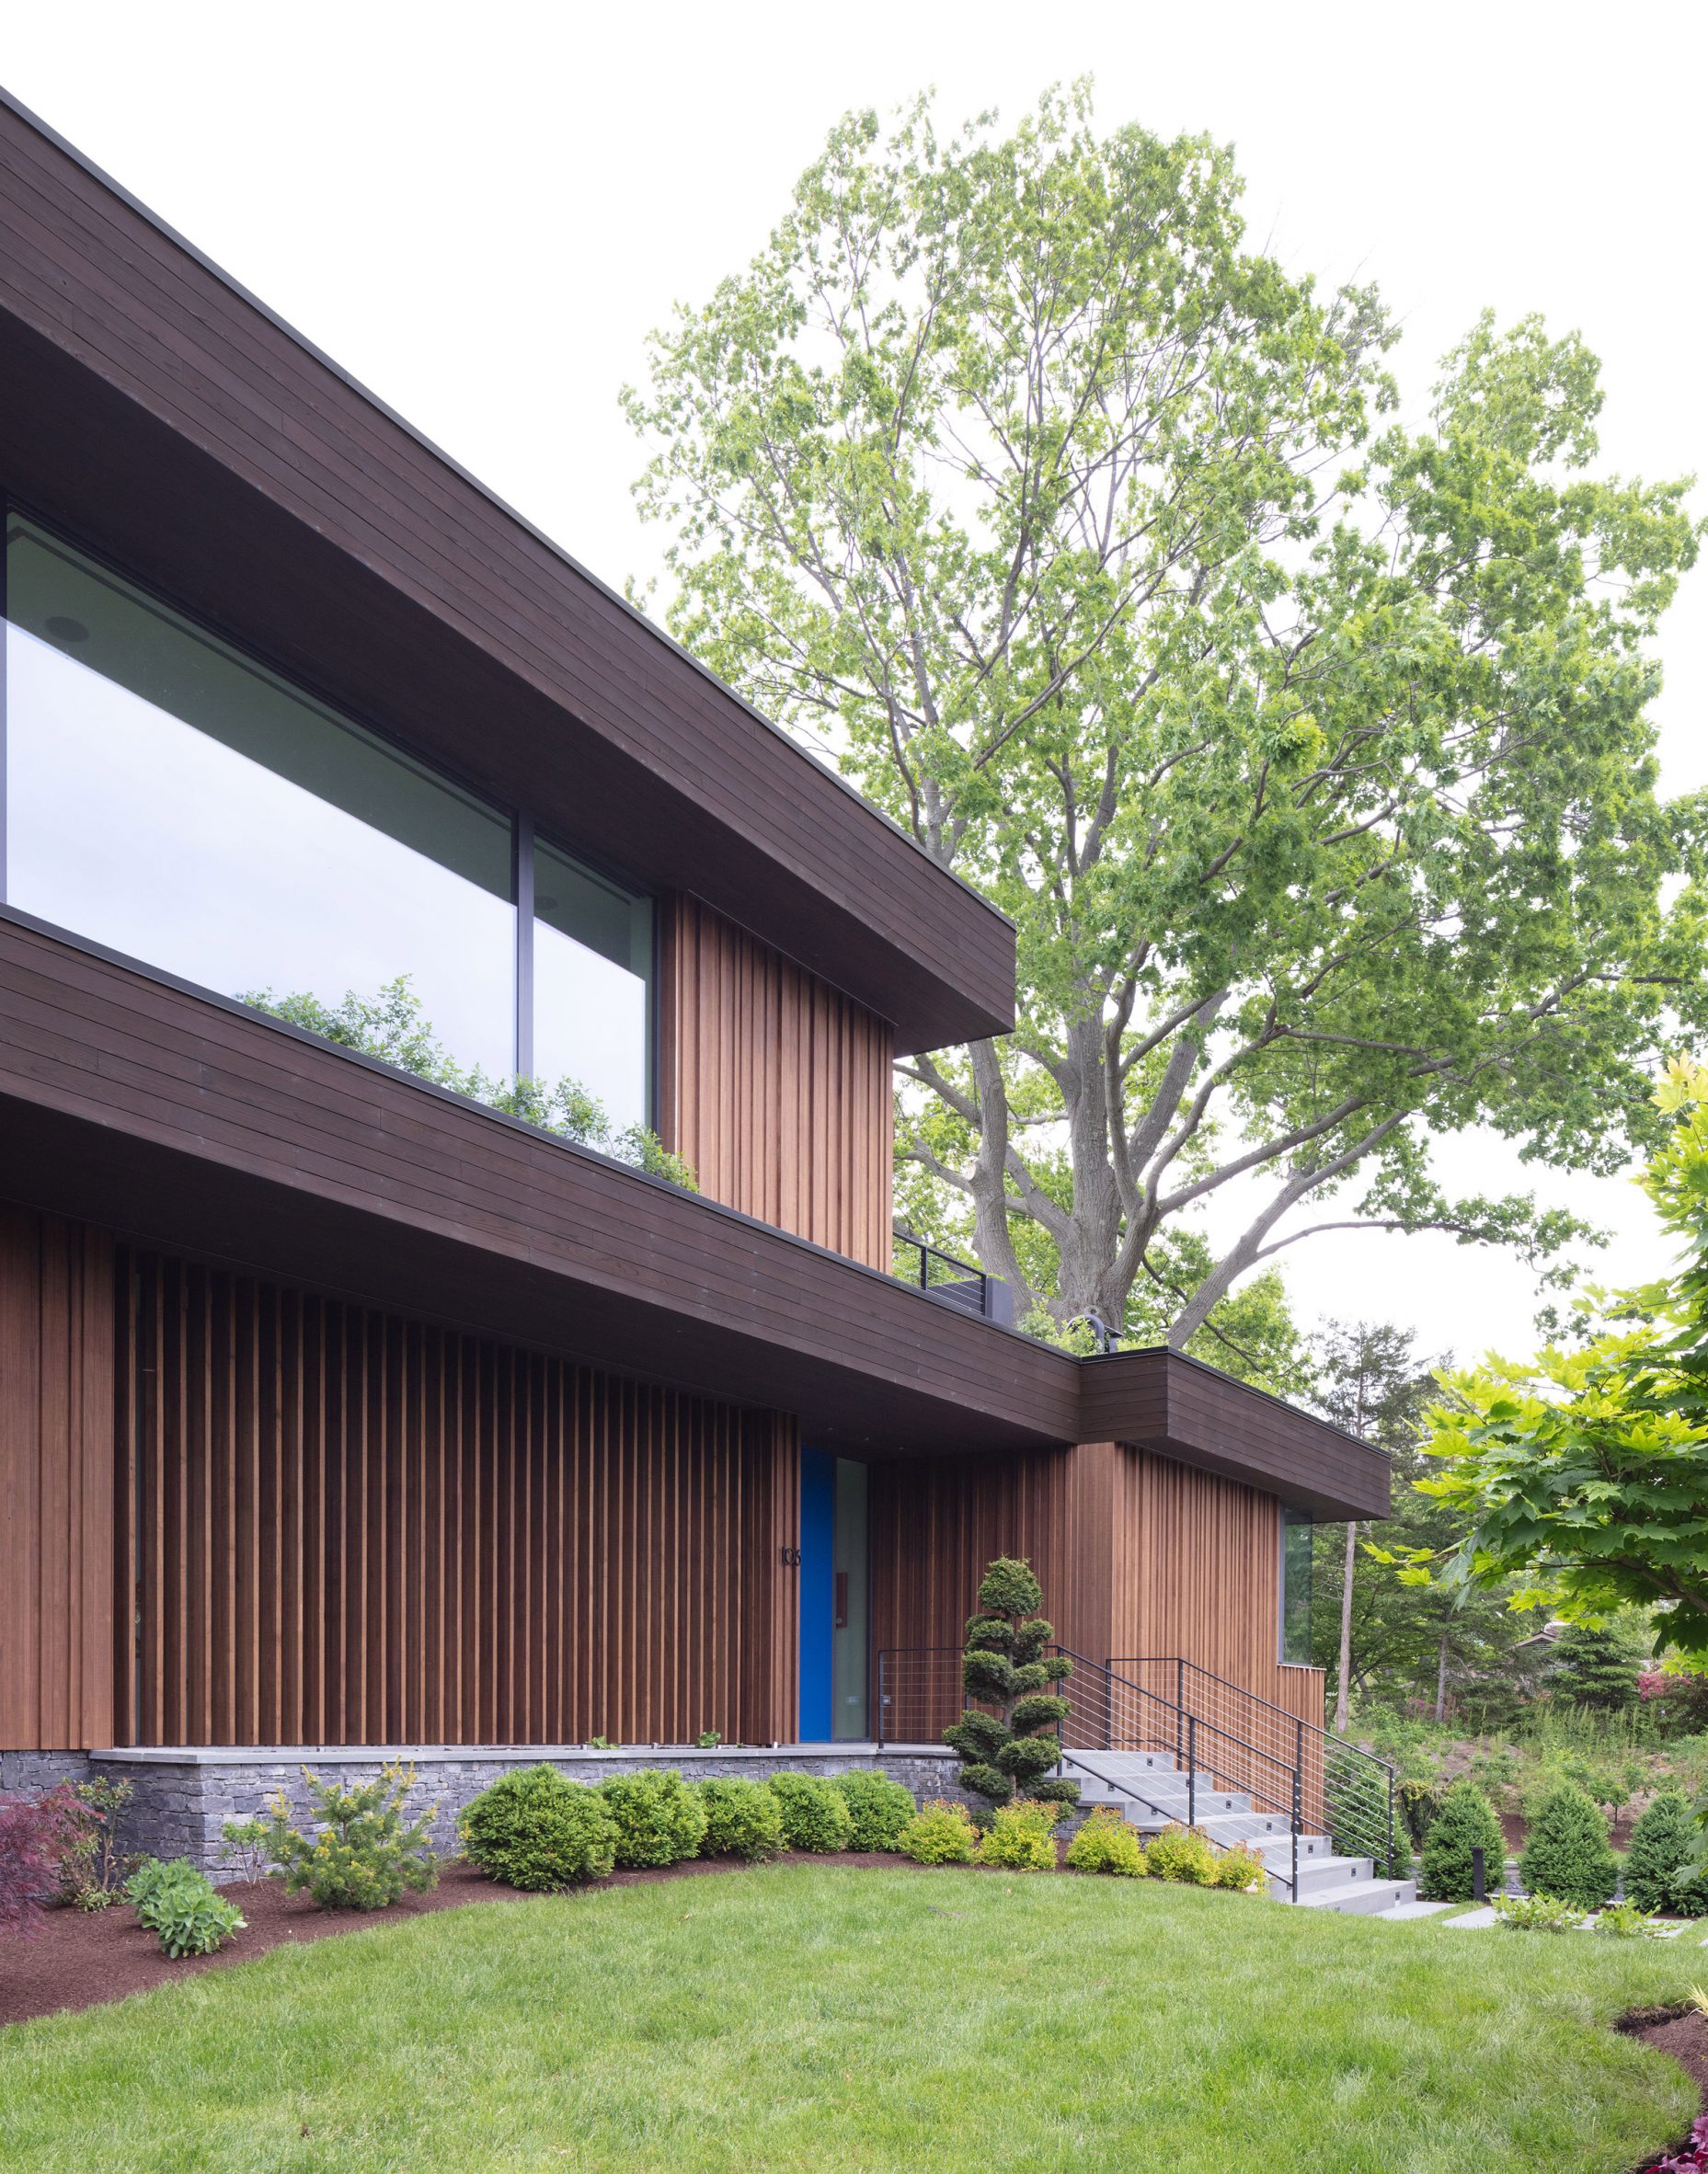 Exterior of a timber-clad house by Worrell Yeung with cantilevered roof planes and terraces